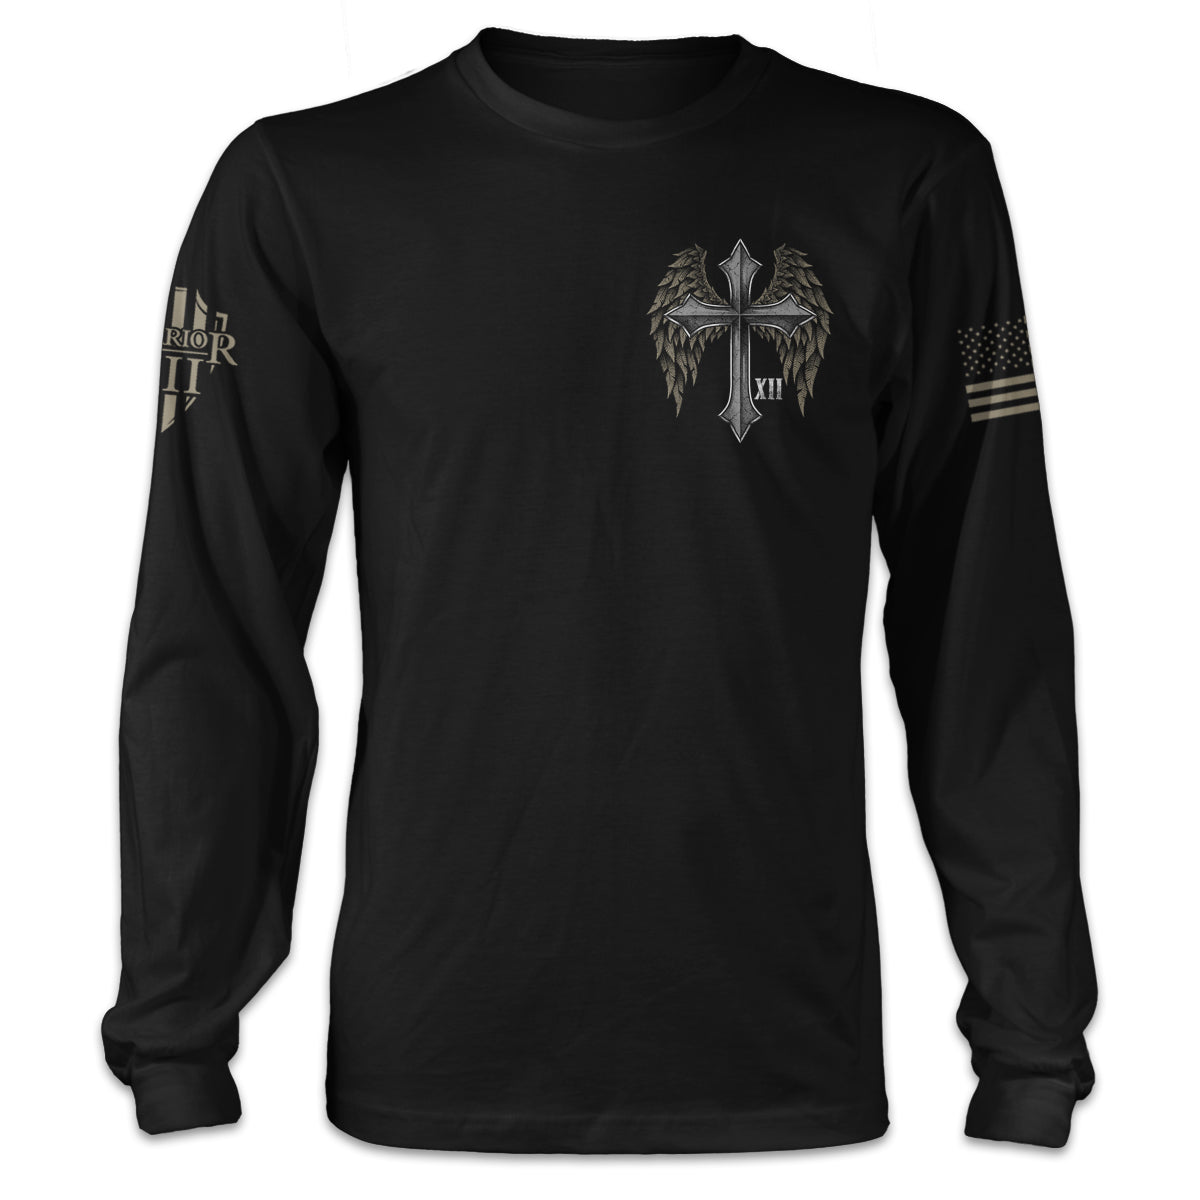 A black long sleeve shirt with a cross with wings printed on the front.